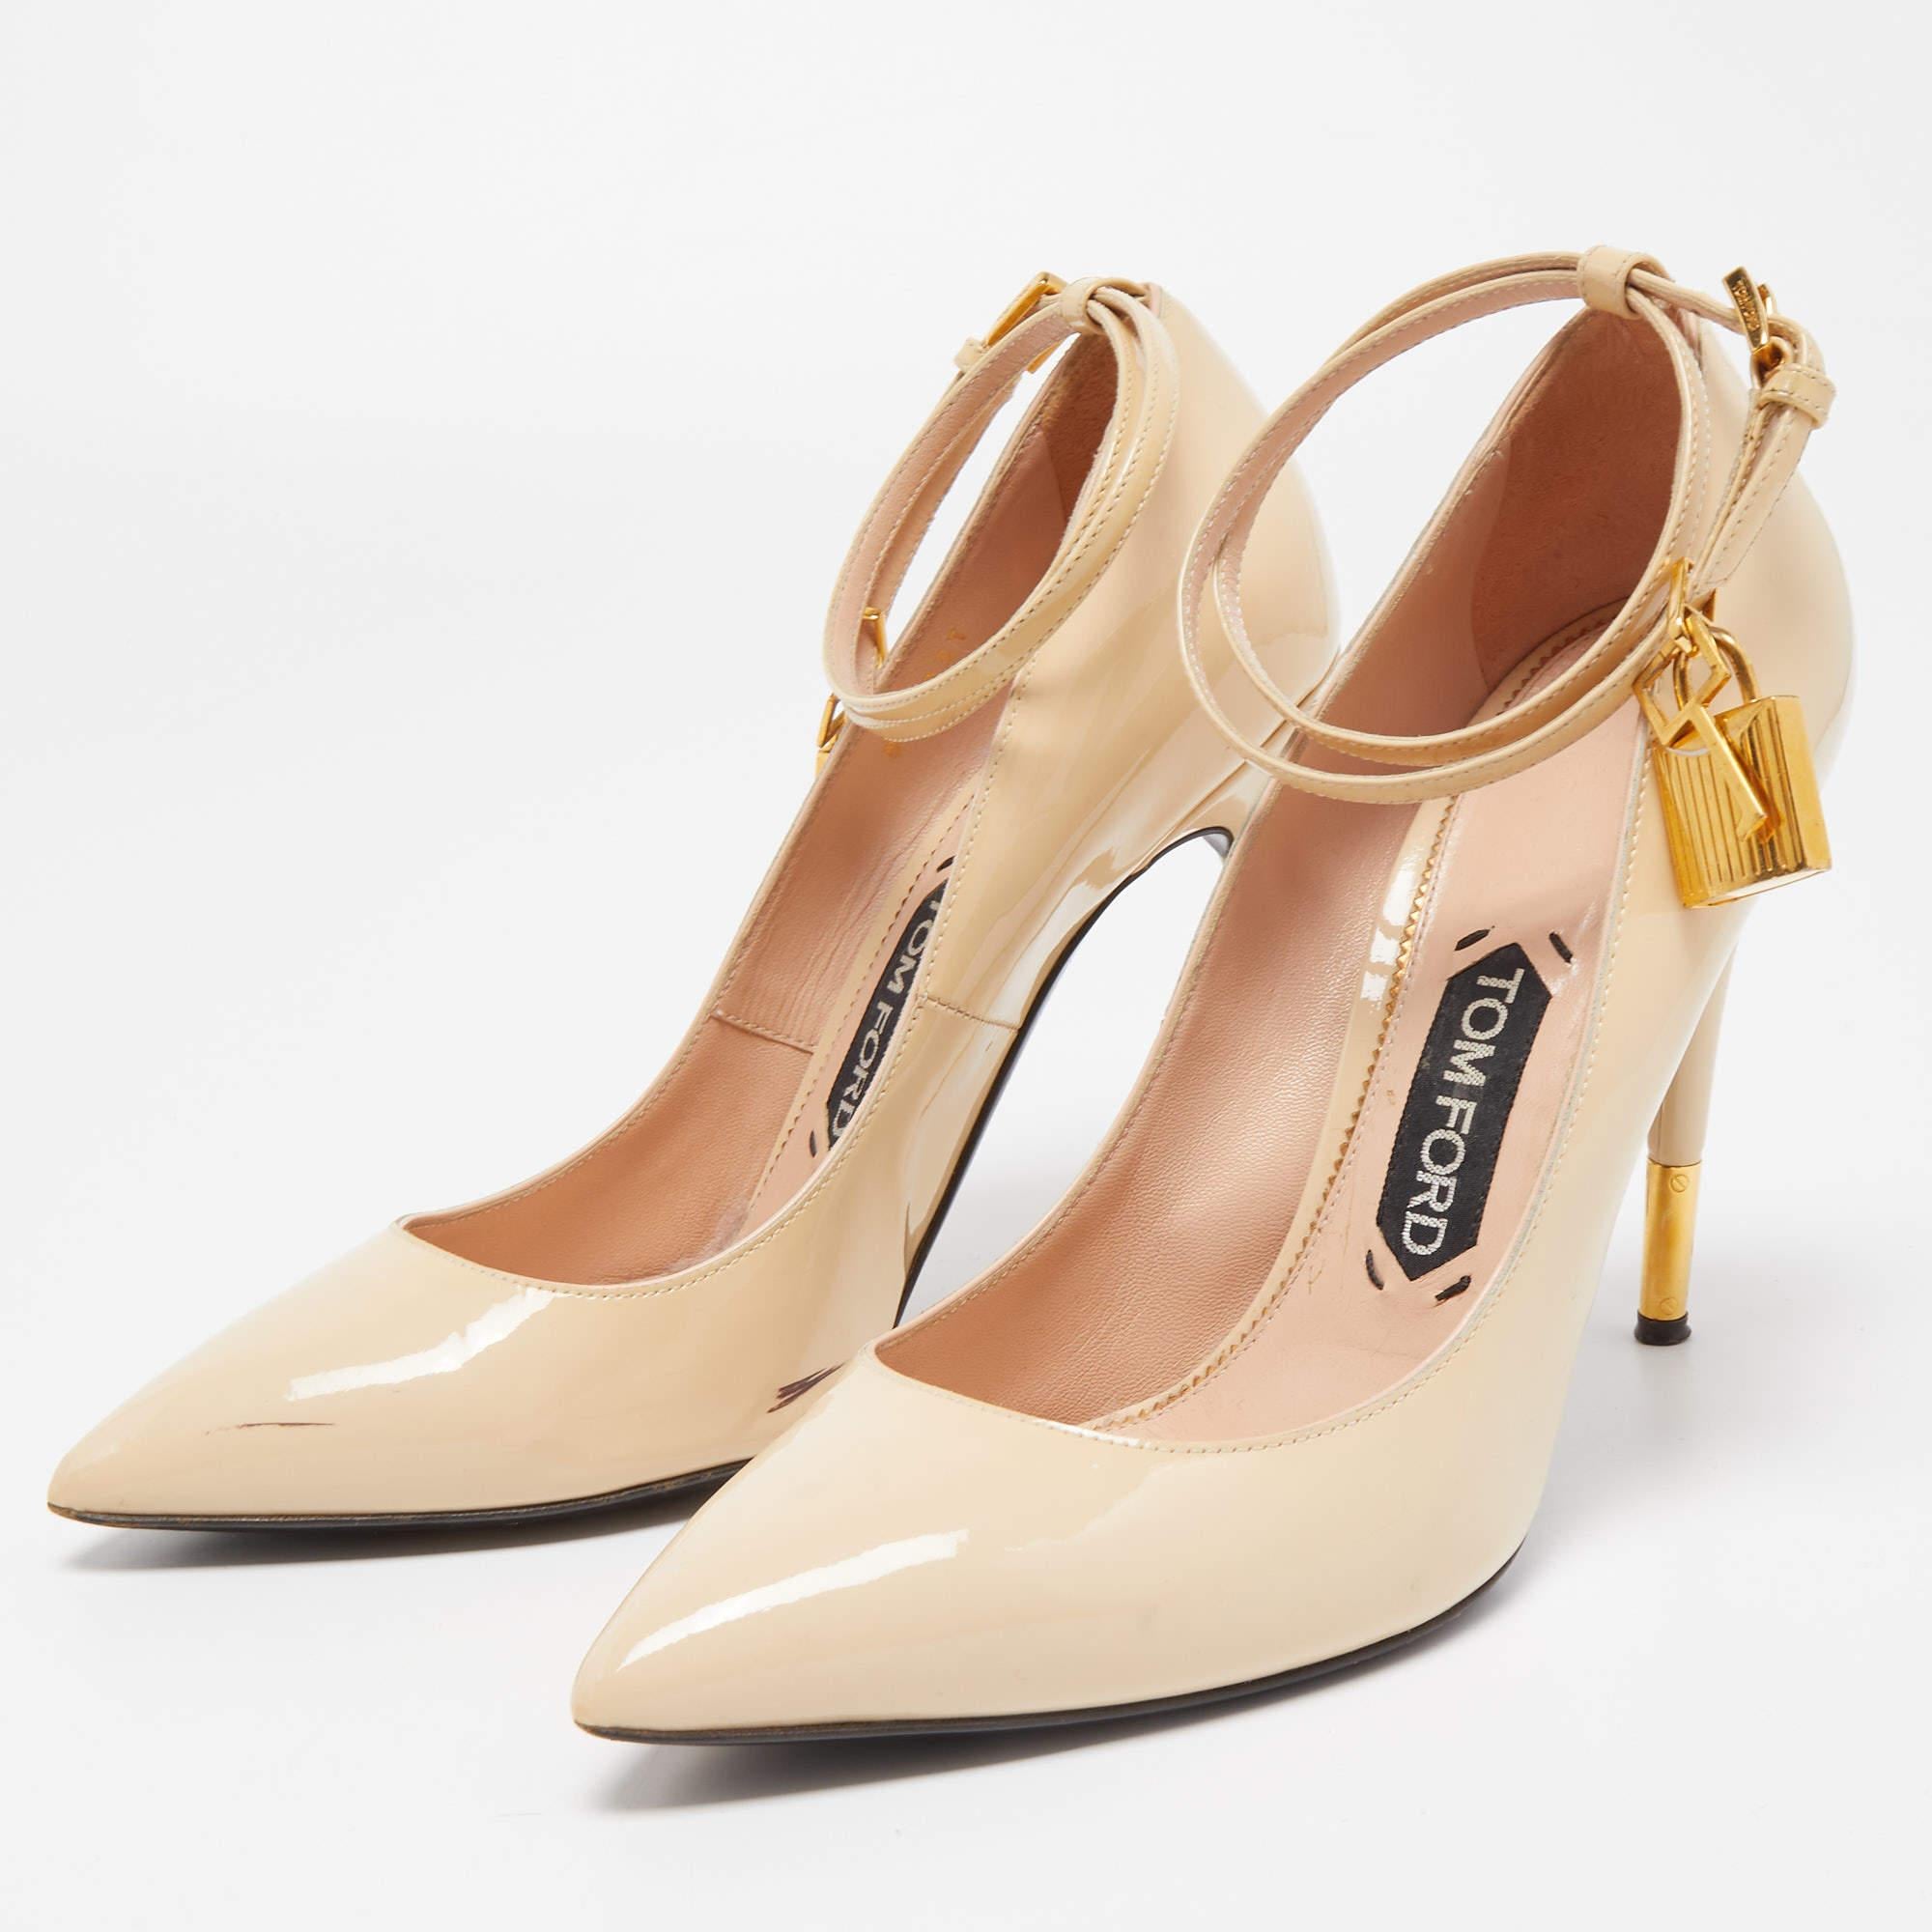 Women's Tom Ford Cream Patent Leather Padlock Ankle Strap Pumps Size 38.5